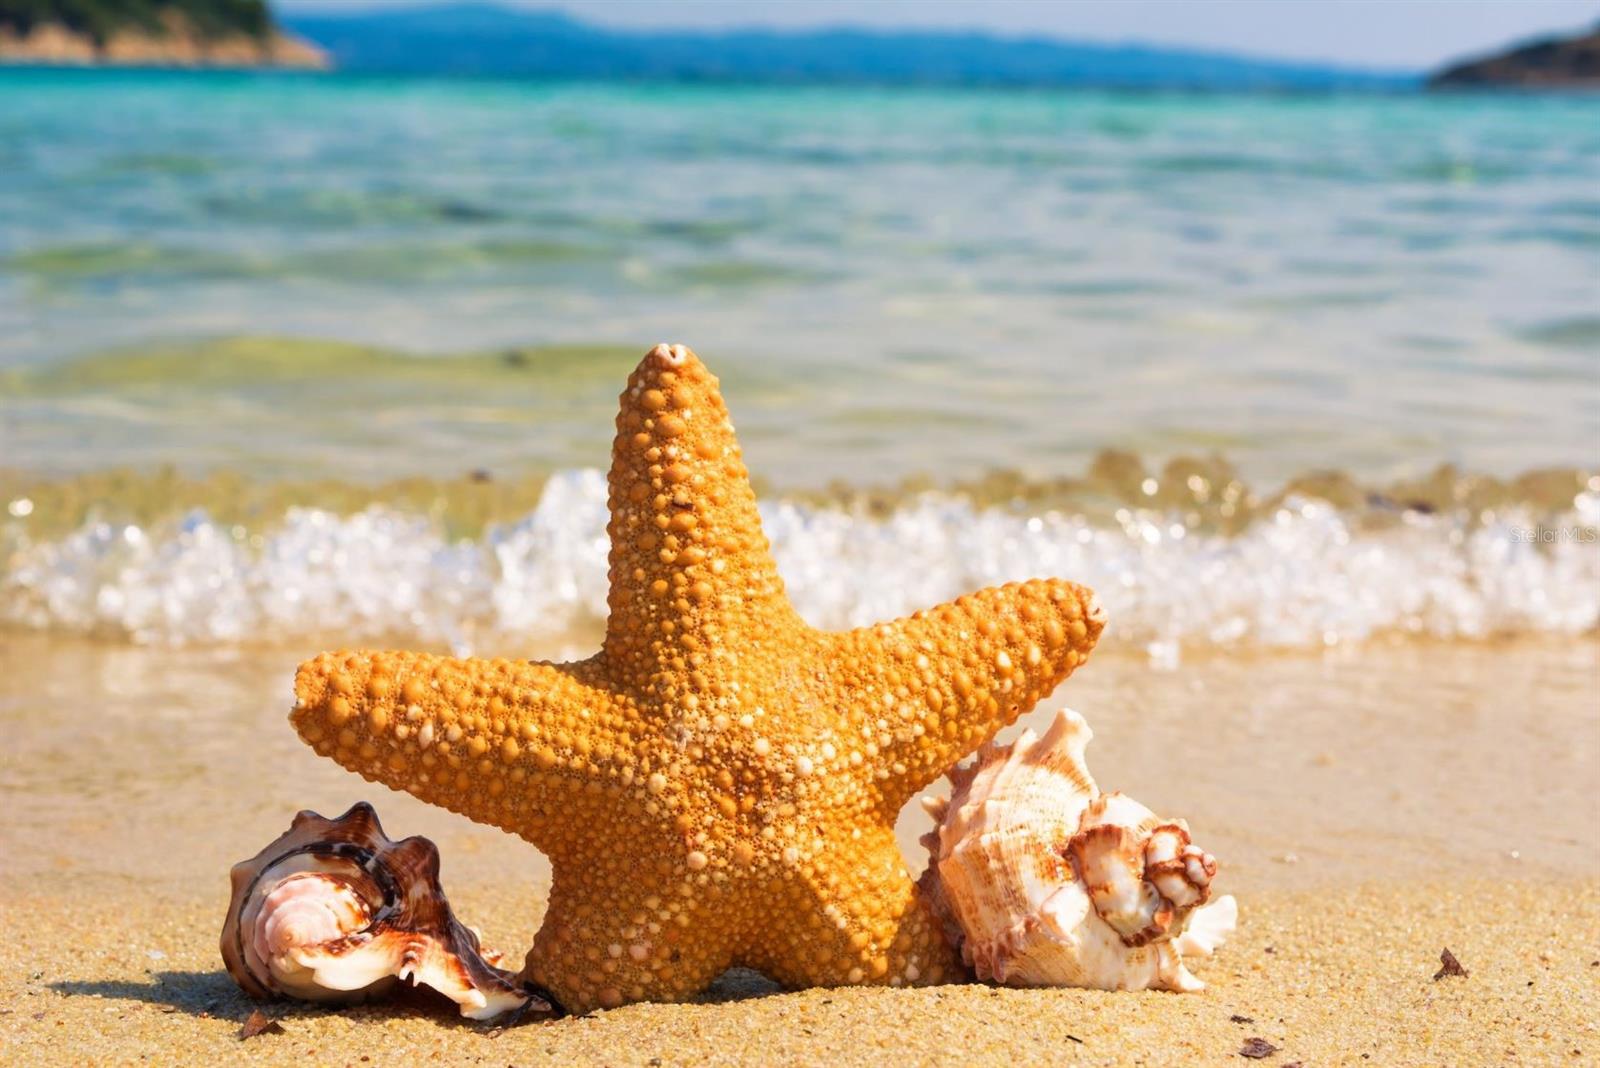 Sunshine and Sand dollars are calling your name. With some of the worlds best local beaches less than an hour away, always keep that perfect tan a glow.